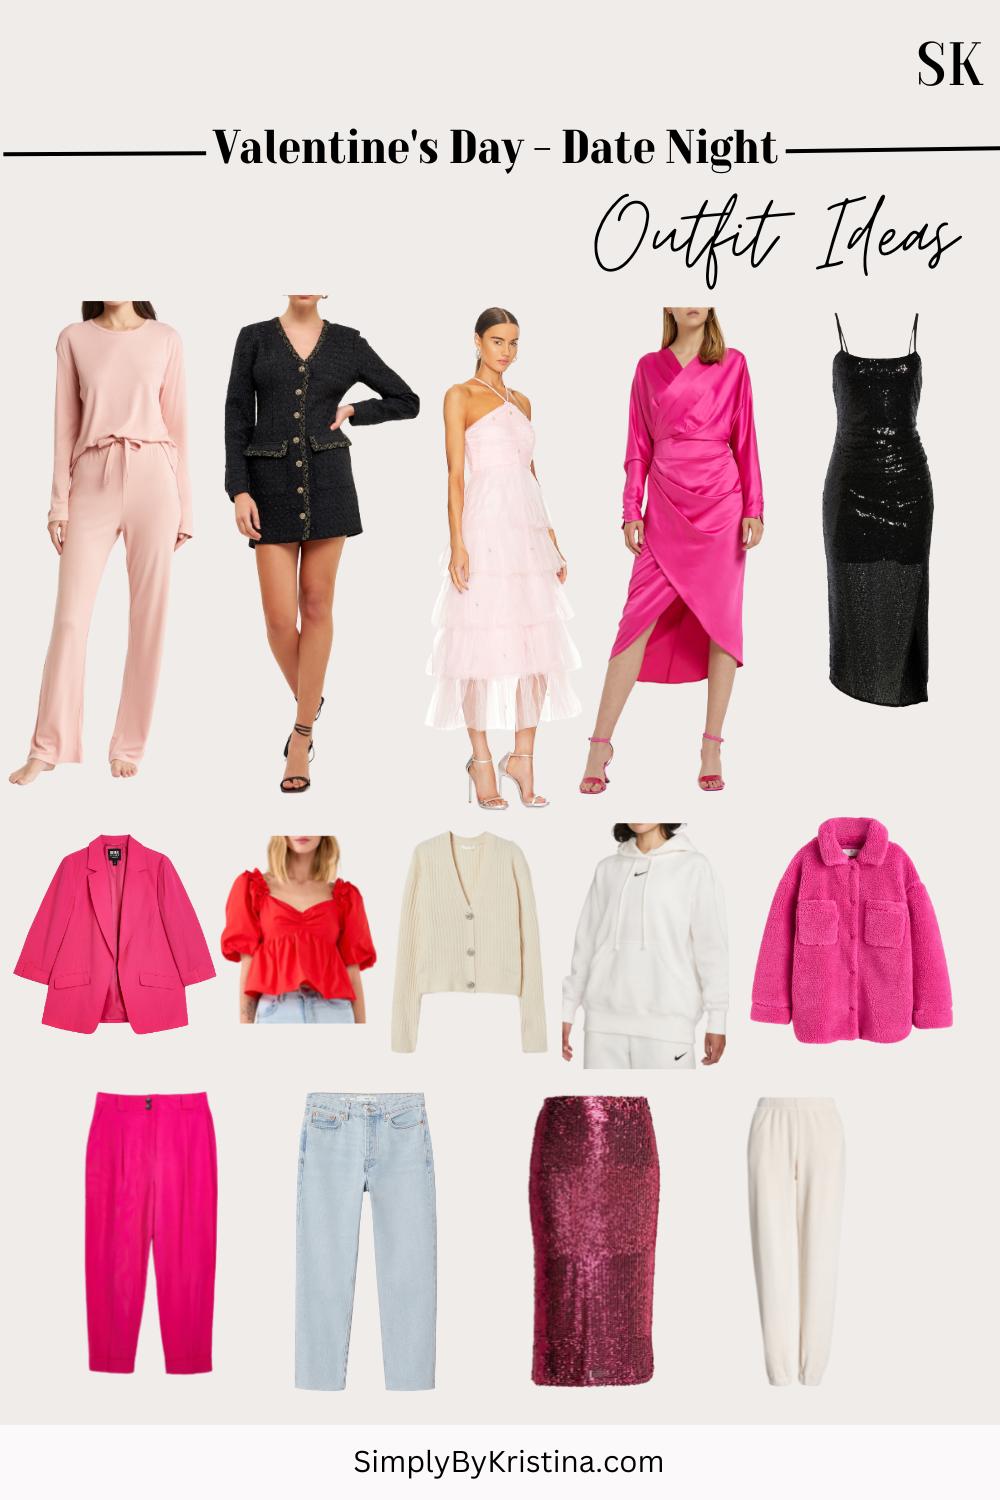 Valentine's Day - Date Night Outfit Ideas - SimplyByKristina